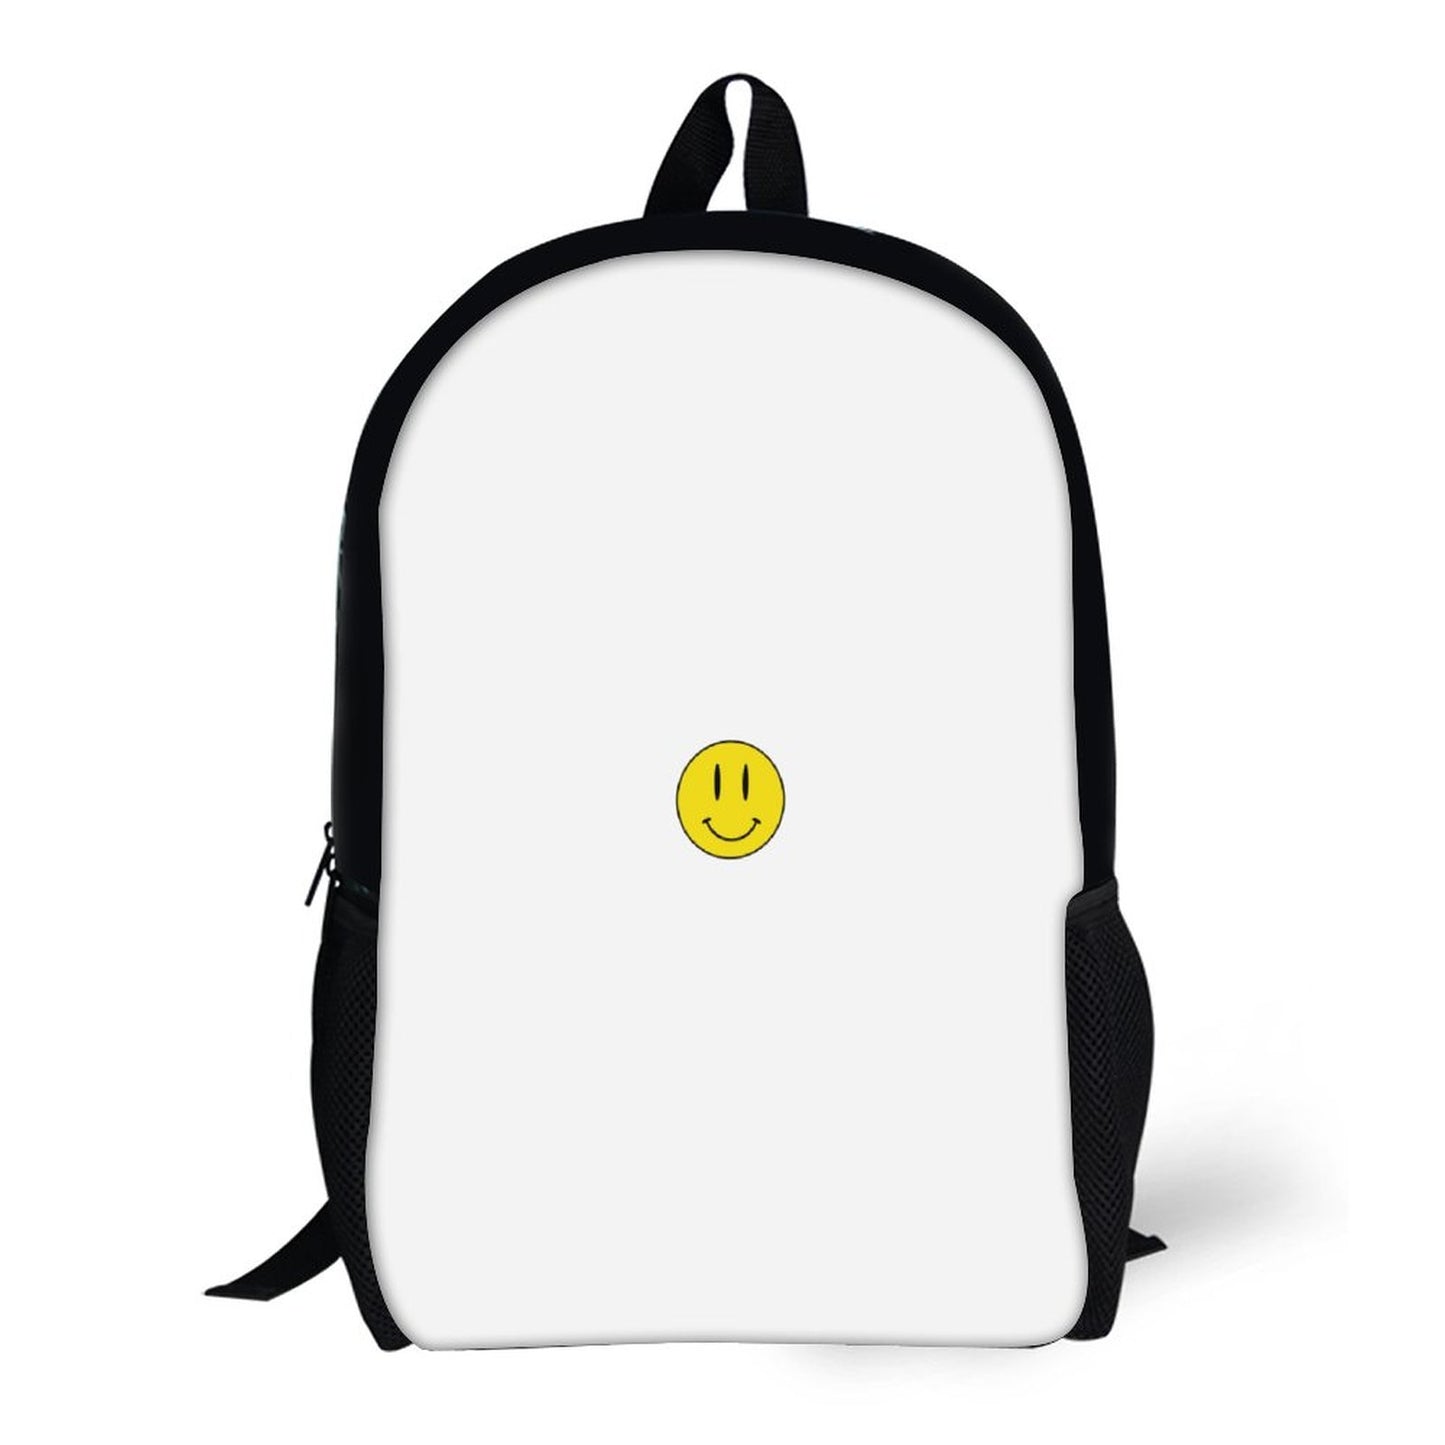 Create Your Own 17 inch Backpack